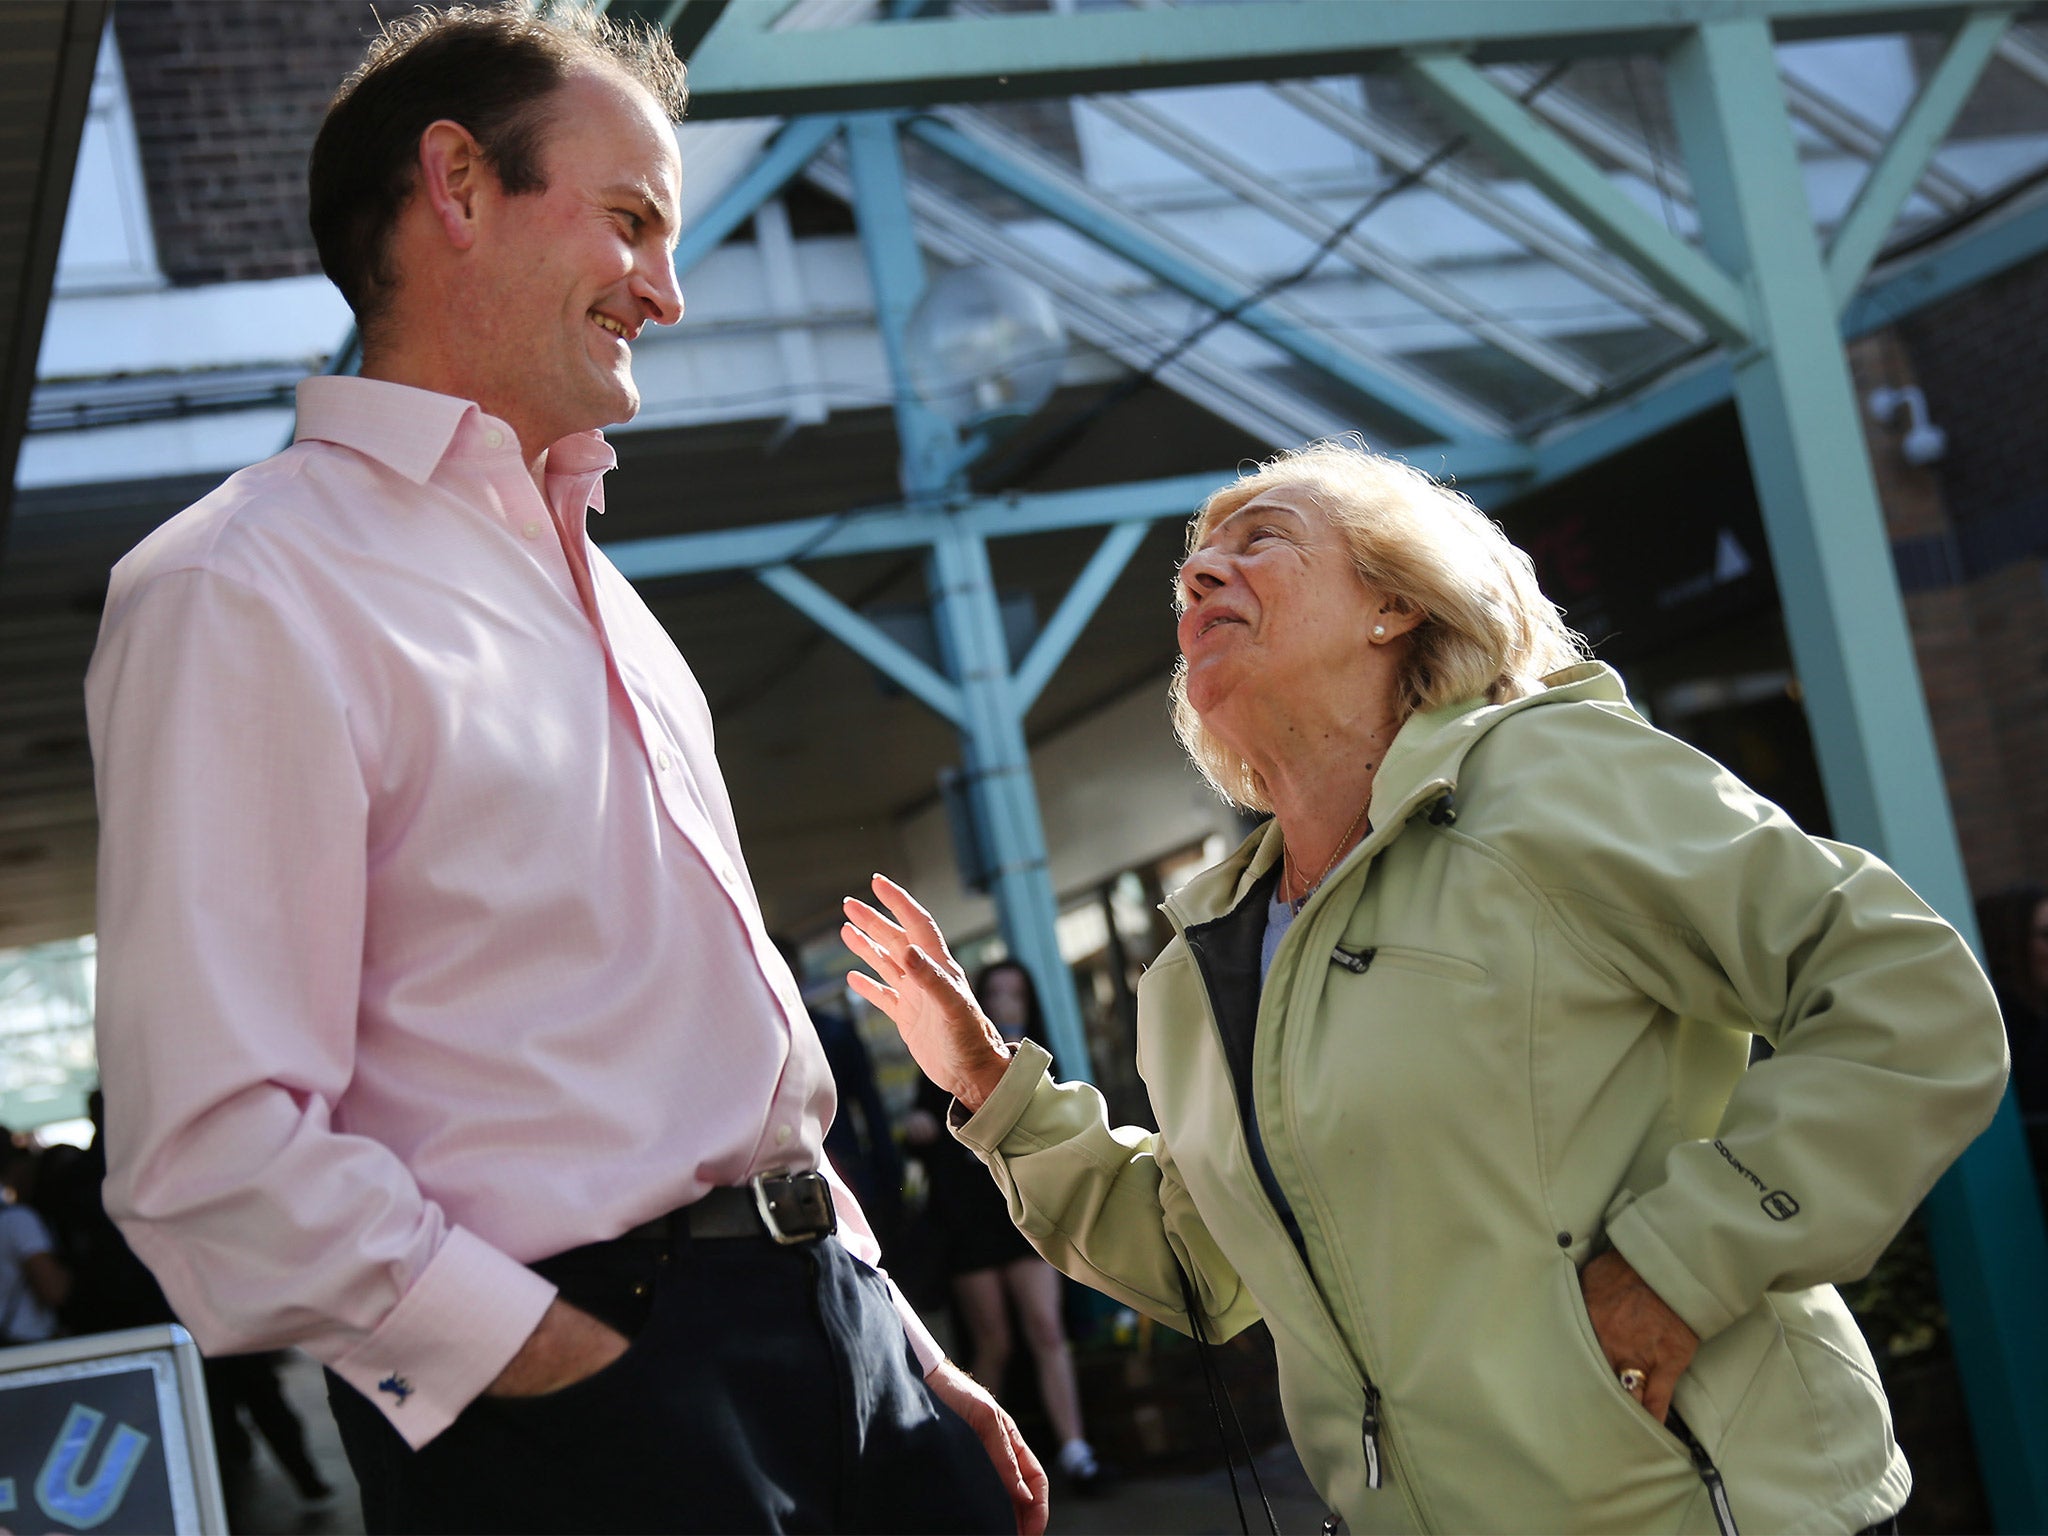 UKIP’s Douglas Carswell talks to supporter Asma Jackson as he canvasses for votes in Frinton-on-Sea